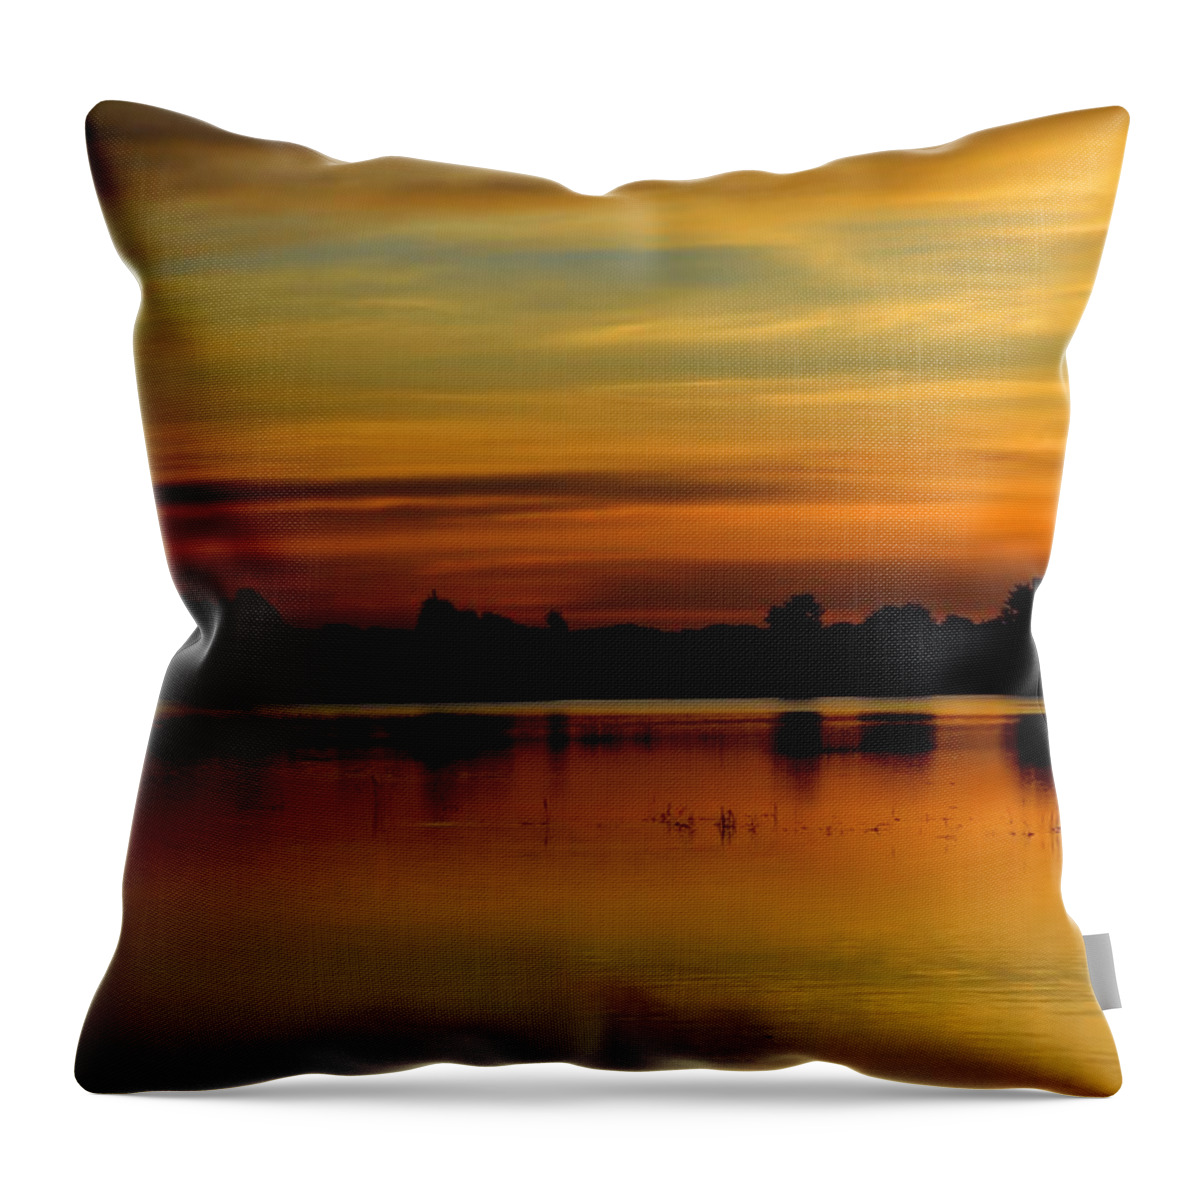 Marsh Throw Pillow featuring the photograph Marsh Rise Tile 1 by Bonfire Photography